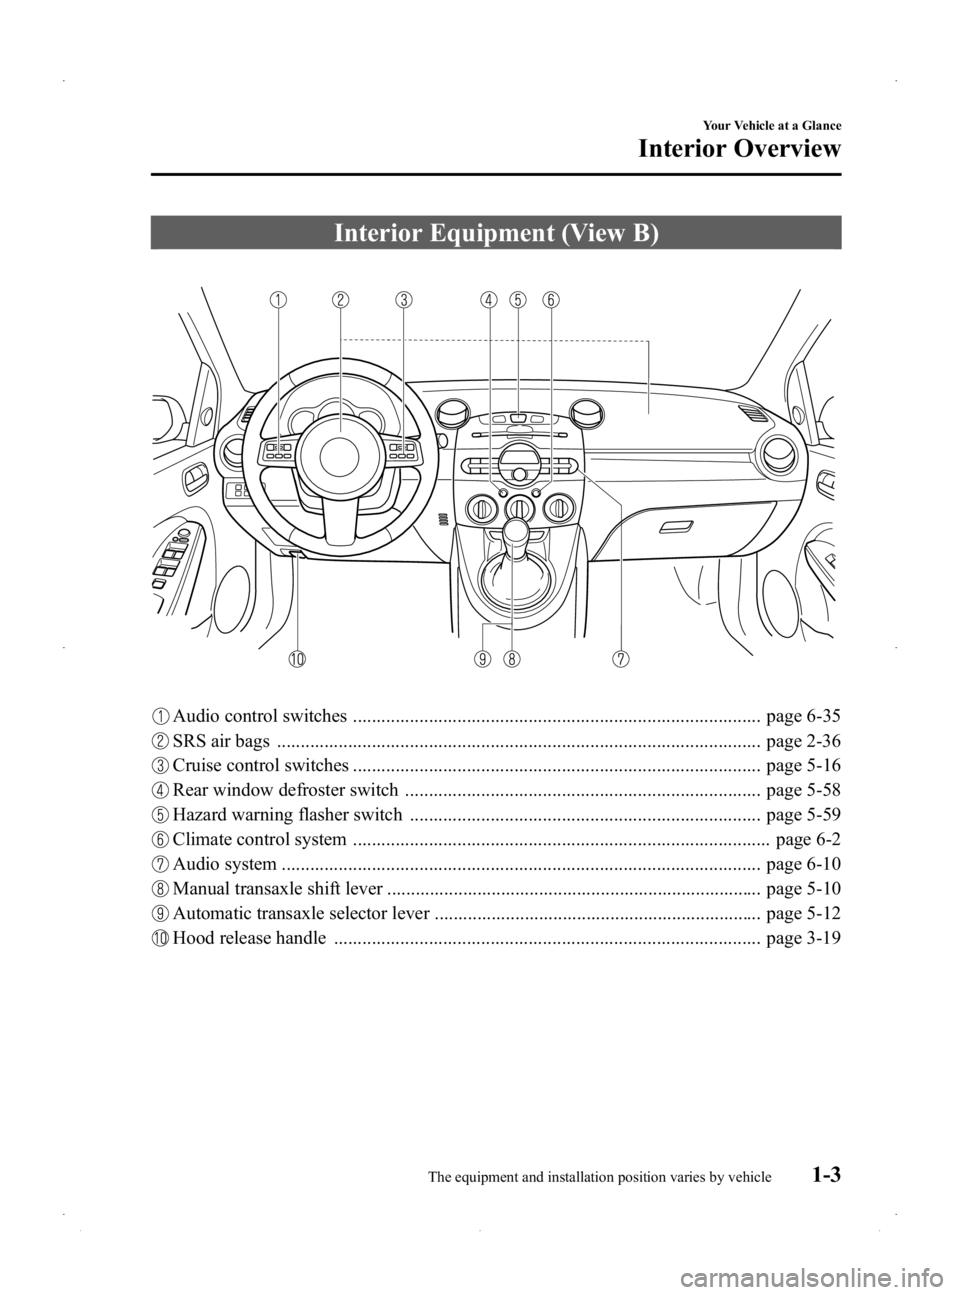 MAZDA MODEL 2 2014  Owners Manual Black plate (9,1)
Interior Equipment (View B)
Audio control switches ...................................................................................... page 6-35
SRS air bags .....................